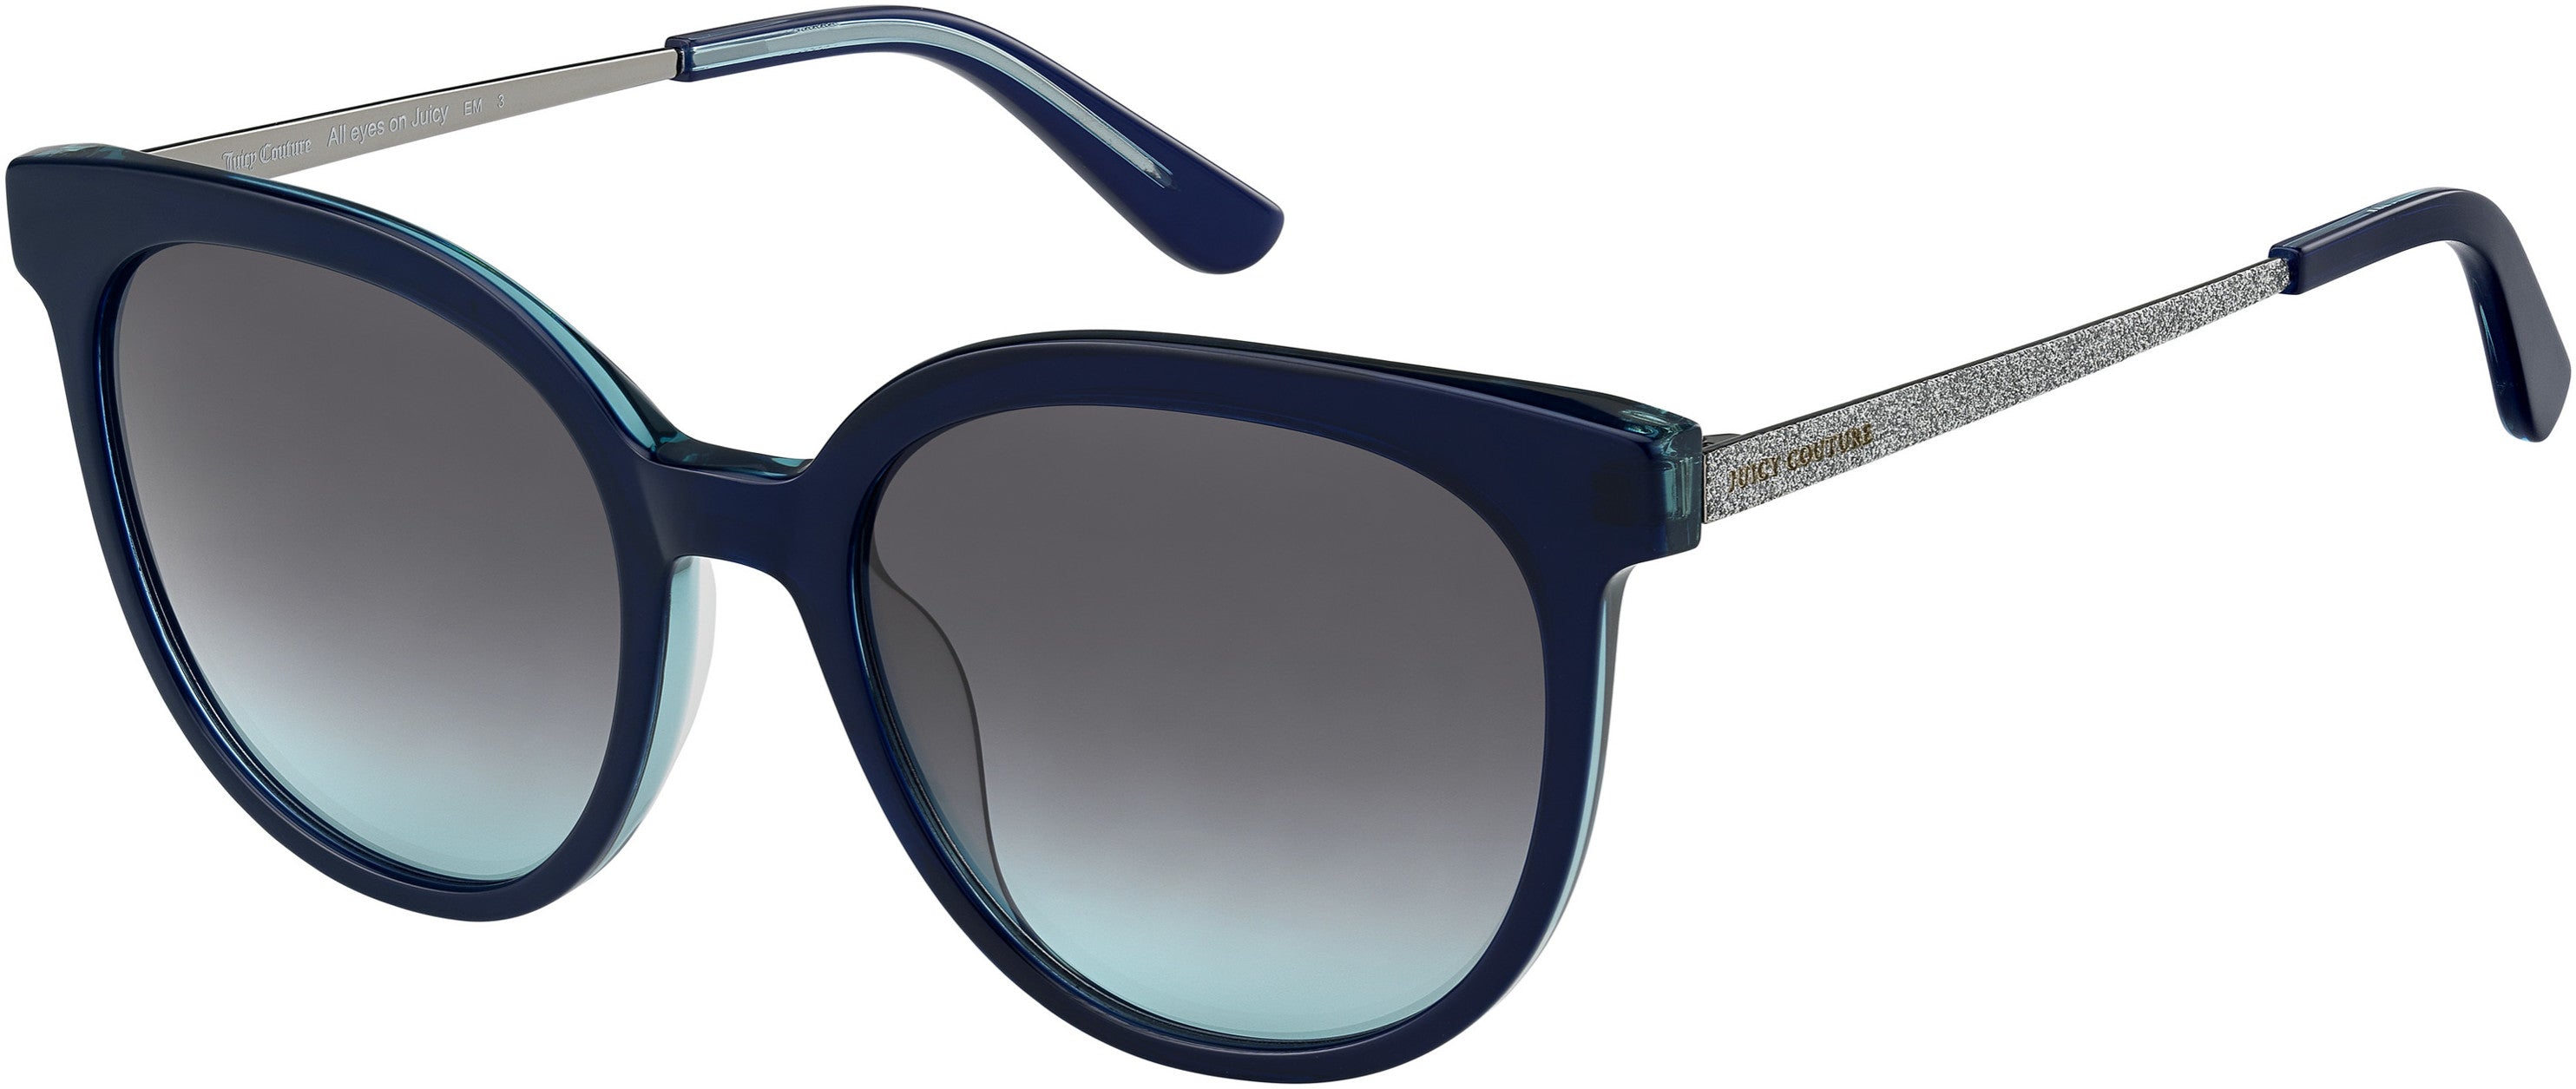 Juicy Couture Juicy 610/G/S Oval Modified Sunglasses 0QM4-0QM4  Crystal Blue (I7 Gray Shaded Petrol)